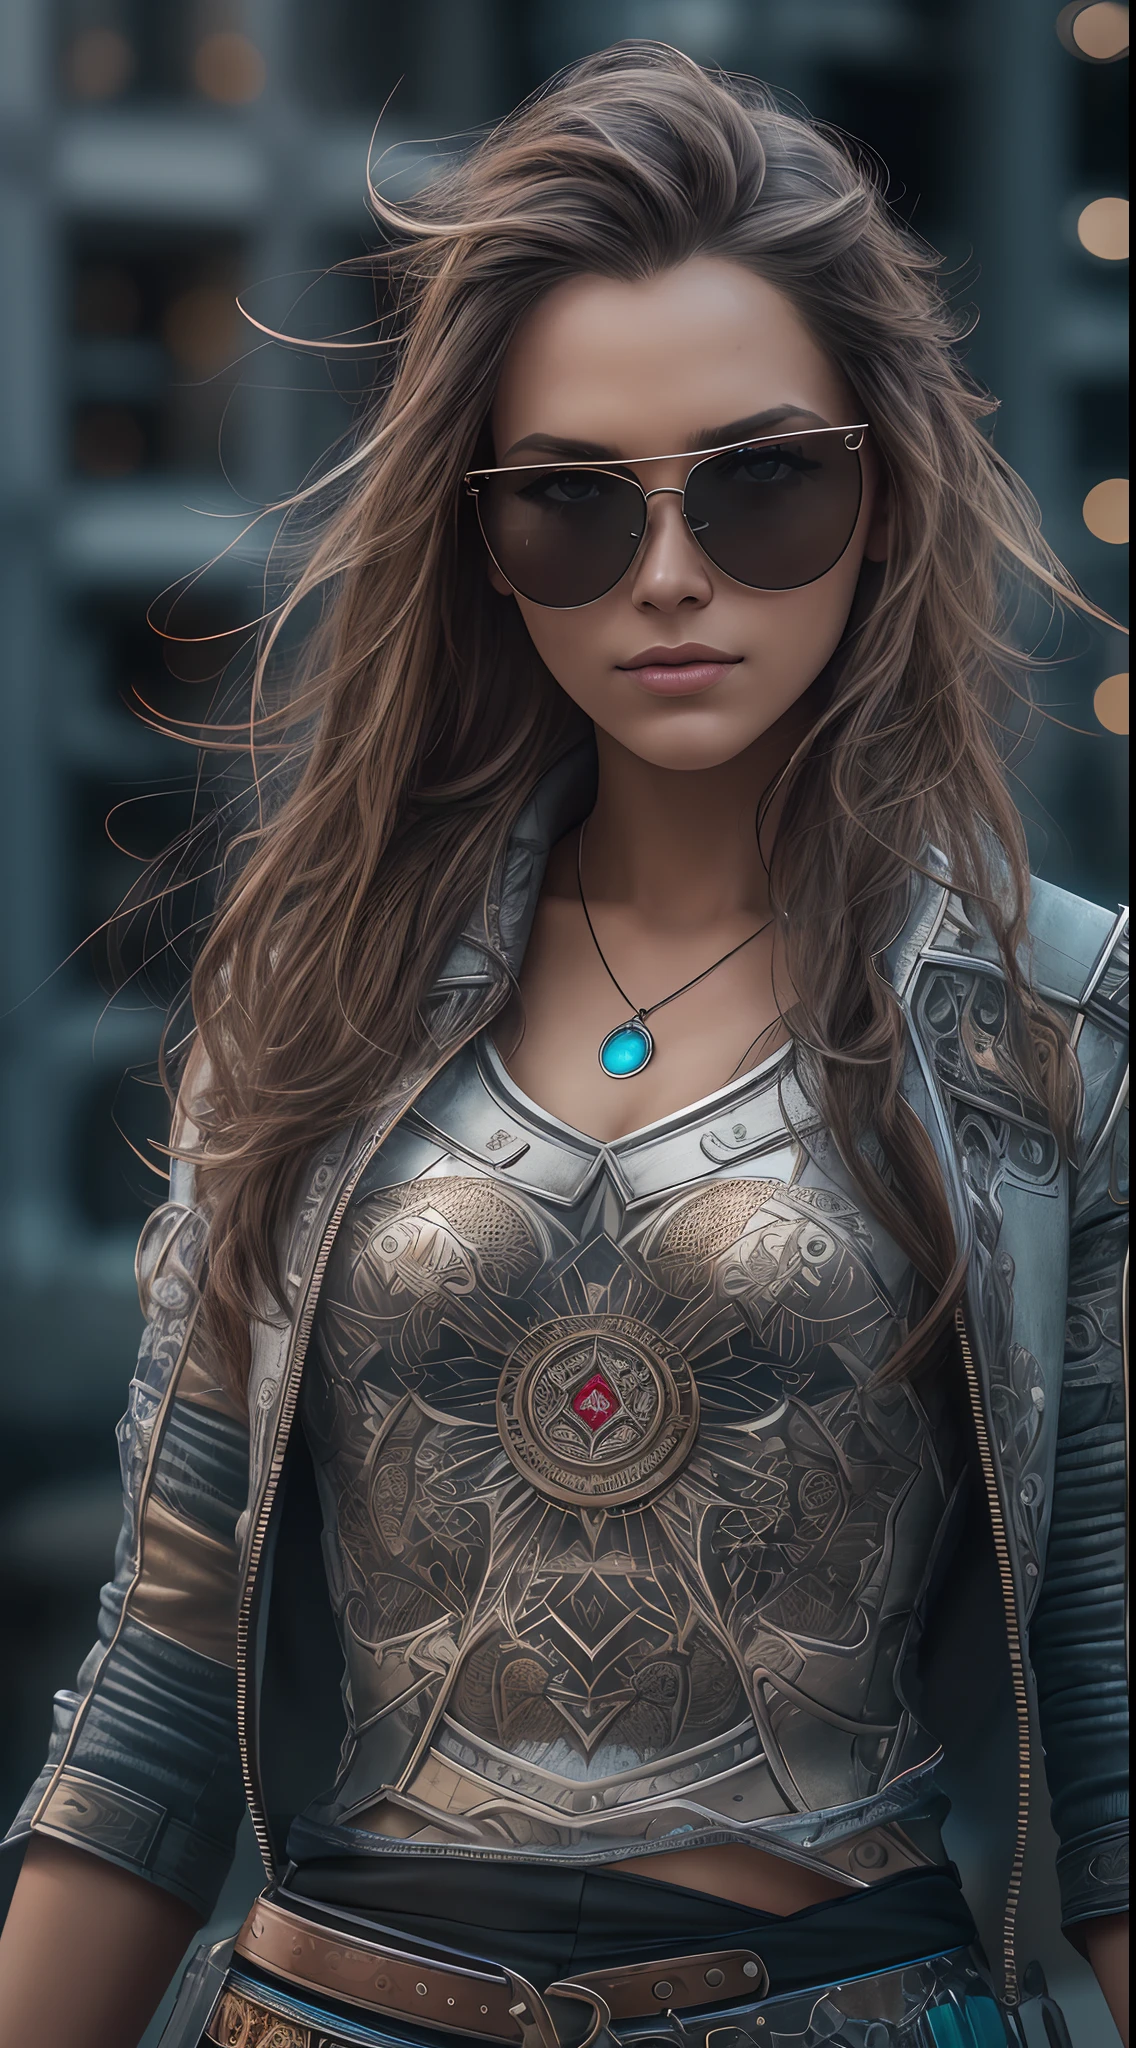 A very realistic and very detailed portrait oF a beautiFul German woman wearing sunglasses in the Future city oF Berlin , ((Full-body:1.2)) , The outFit is engraved with German shield plates , 長髮, 手部和身體紋身, 時尚姿勢, BeautiFul hazel eyes symmetrical detailed, detailed gorgeous Face, 先進的德國環境 , Integration oF German civilization with the technology oF the Future , 出色的細節, 30 MP, 4k, Canon EOS 5D Mark IV 數位單眼相機, 85毫米鏡頭, sharp Focus, 细节复杂, 長曝光時間, F/8, ISO 100, 快門速度1/125, DiFFused backlight, ((得獎照片)) , Facing camera, 看著相機, 單一視覺, PerFect contrast, 高清晰度, Facial symmetry, Depth-oF-Field, 超詳細攝影, 雷特薩爾, 全域照明, 坦弗塔米姆, 绒毛的, Ultra-High DeFinition, 8K, 虚幻引擎 5, Ultra-sharp Focus, 获奖照片, ArtStation 上的熱門話題